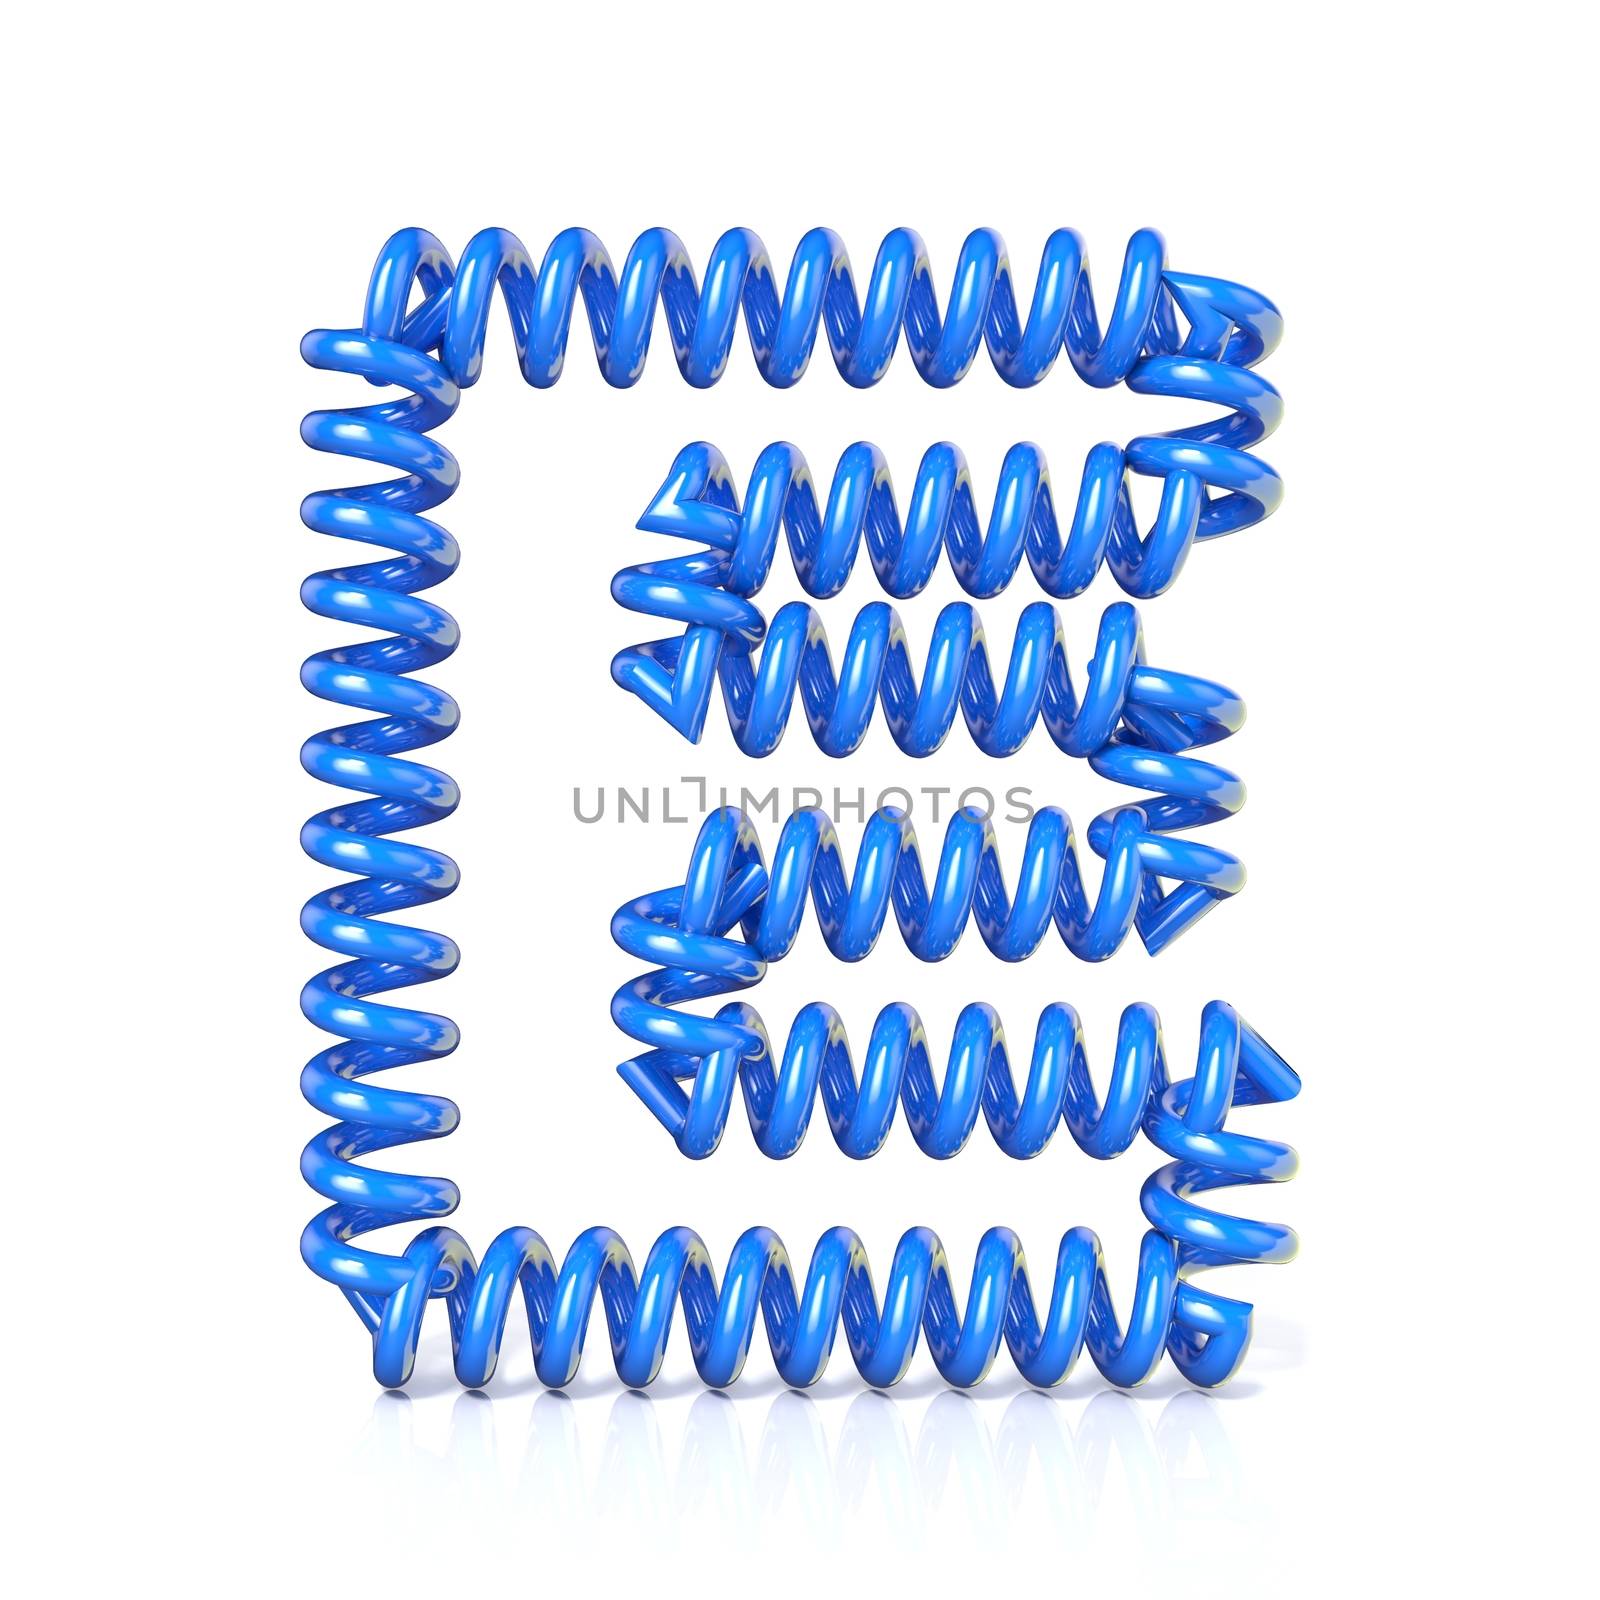 Spring, spiral cable font collection letter - E. 3D render illustration, isolated on white background